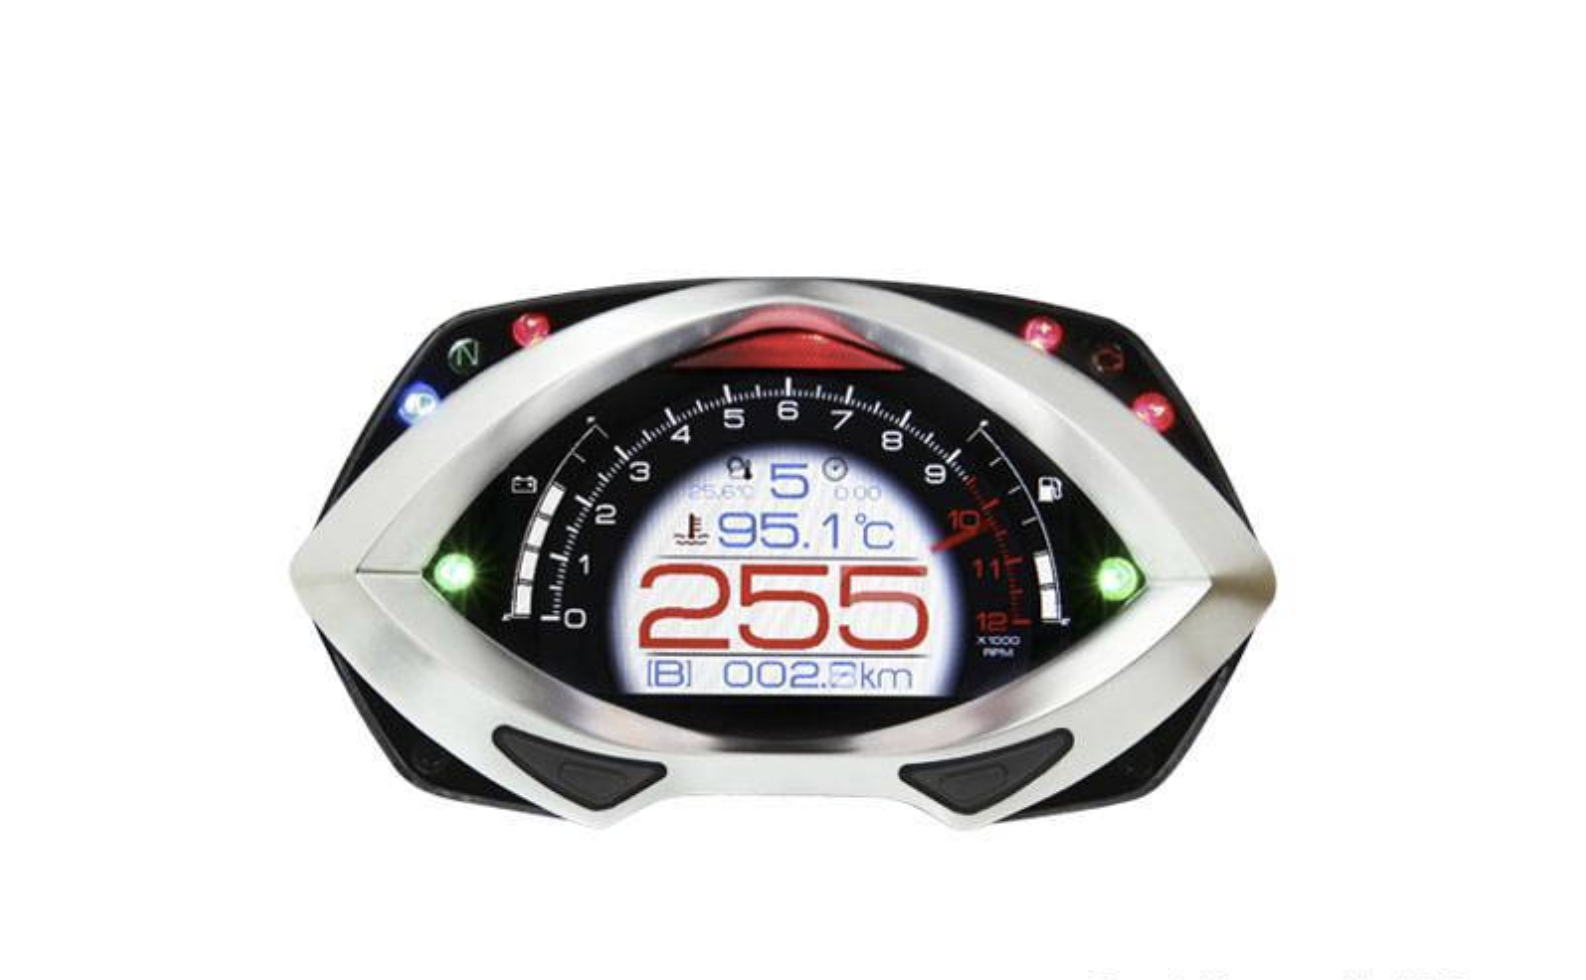 RXF with Advanced TFT LCD Display BA044000 - CafeRacerWebshop.com